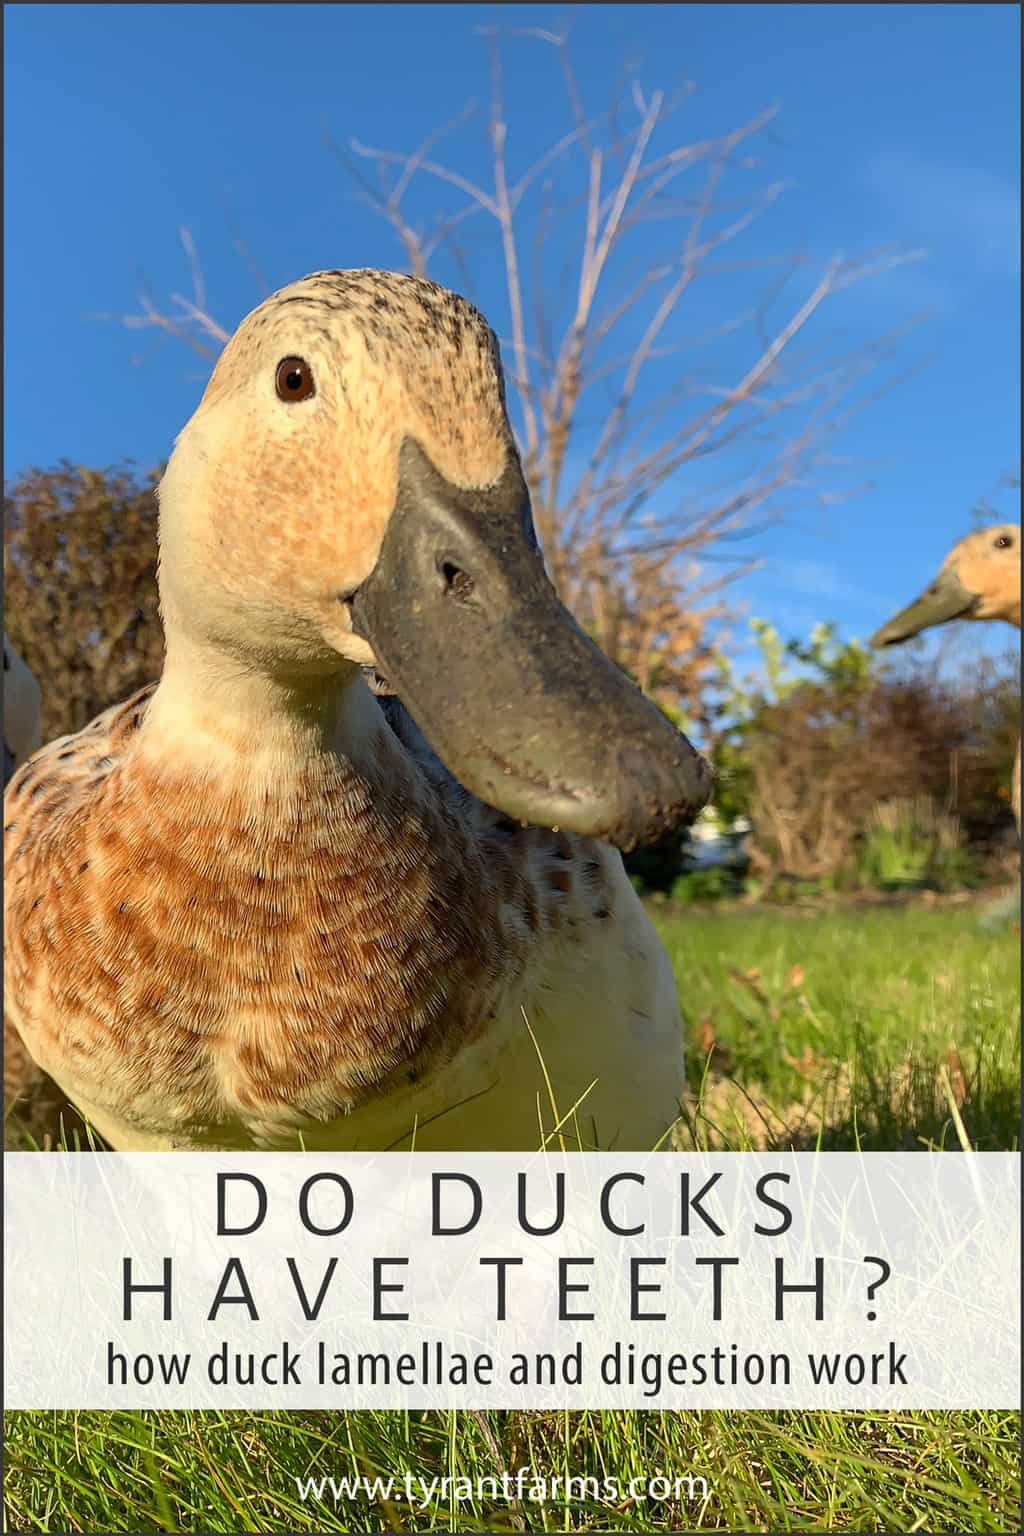 Do ducks have teeth? Find out how duck lamellae and digestion work